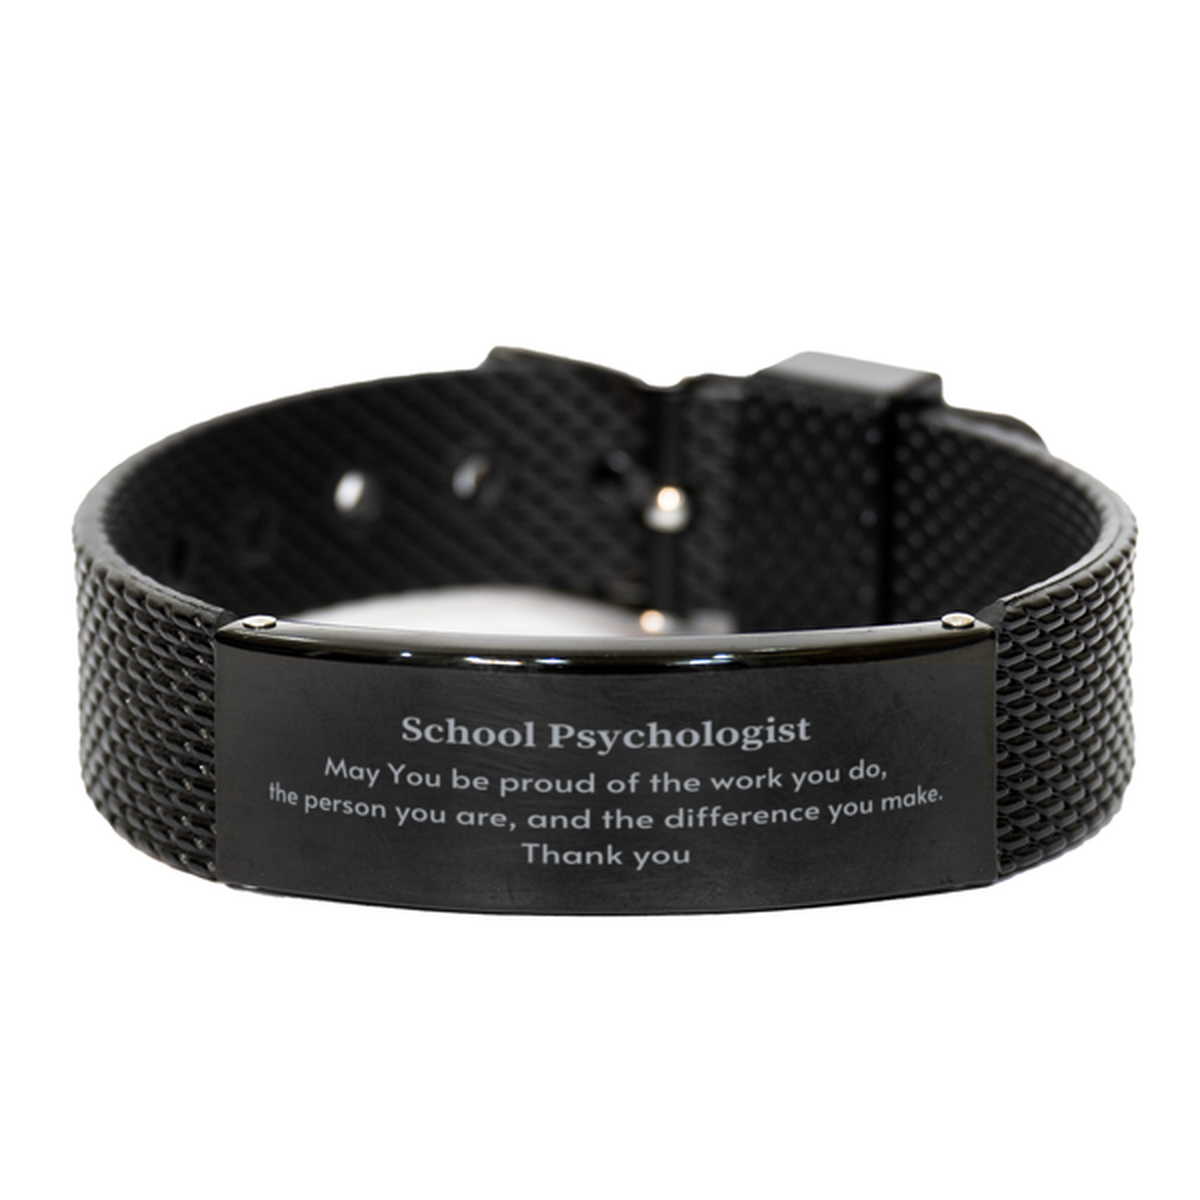 Heartwarming Black Shark Mesh Bracelet Retirement Coworkers Gifts for School Psychologist, School Psychologist May You be proud of the work you do, the person you are Gifts for Boss Men Women Friends